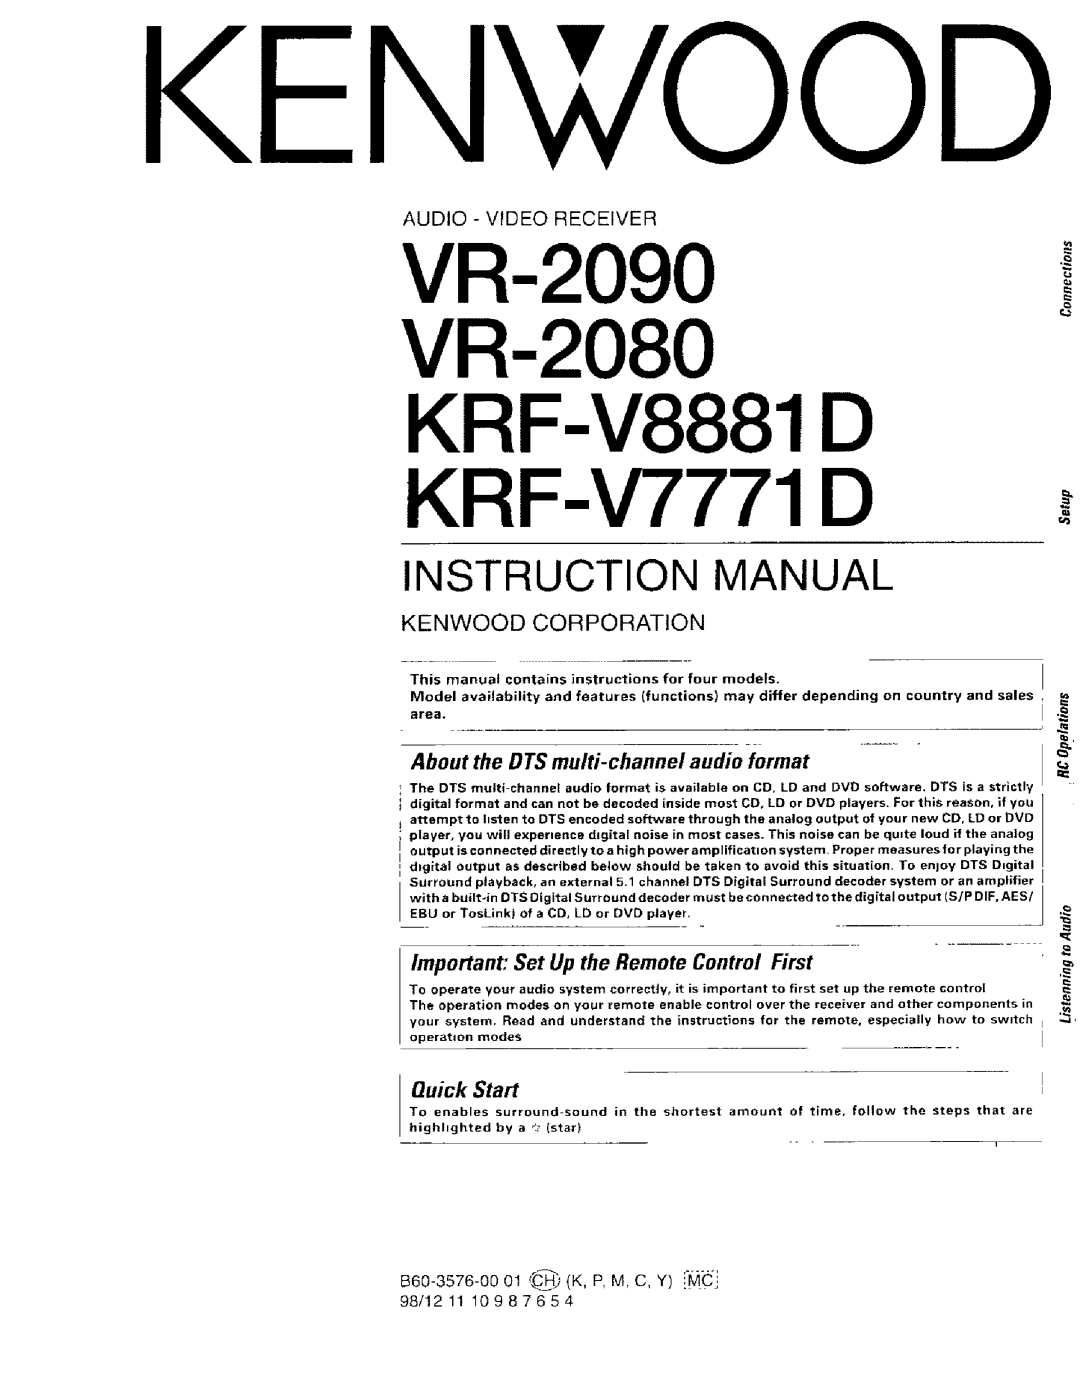 Kenwood VR-2000 instruction manual Kenwood Corporation, About the DTS multi-channelaudio format, Quick Start, KENwOOD 